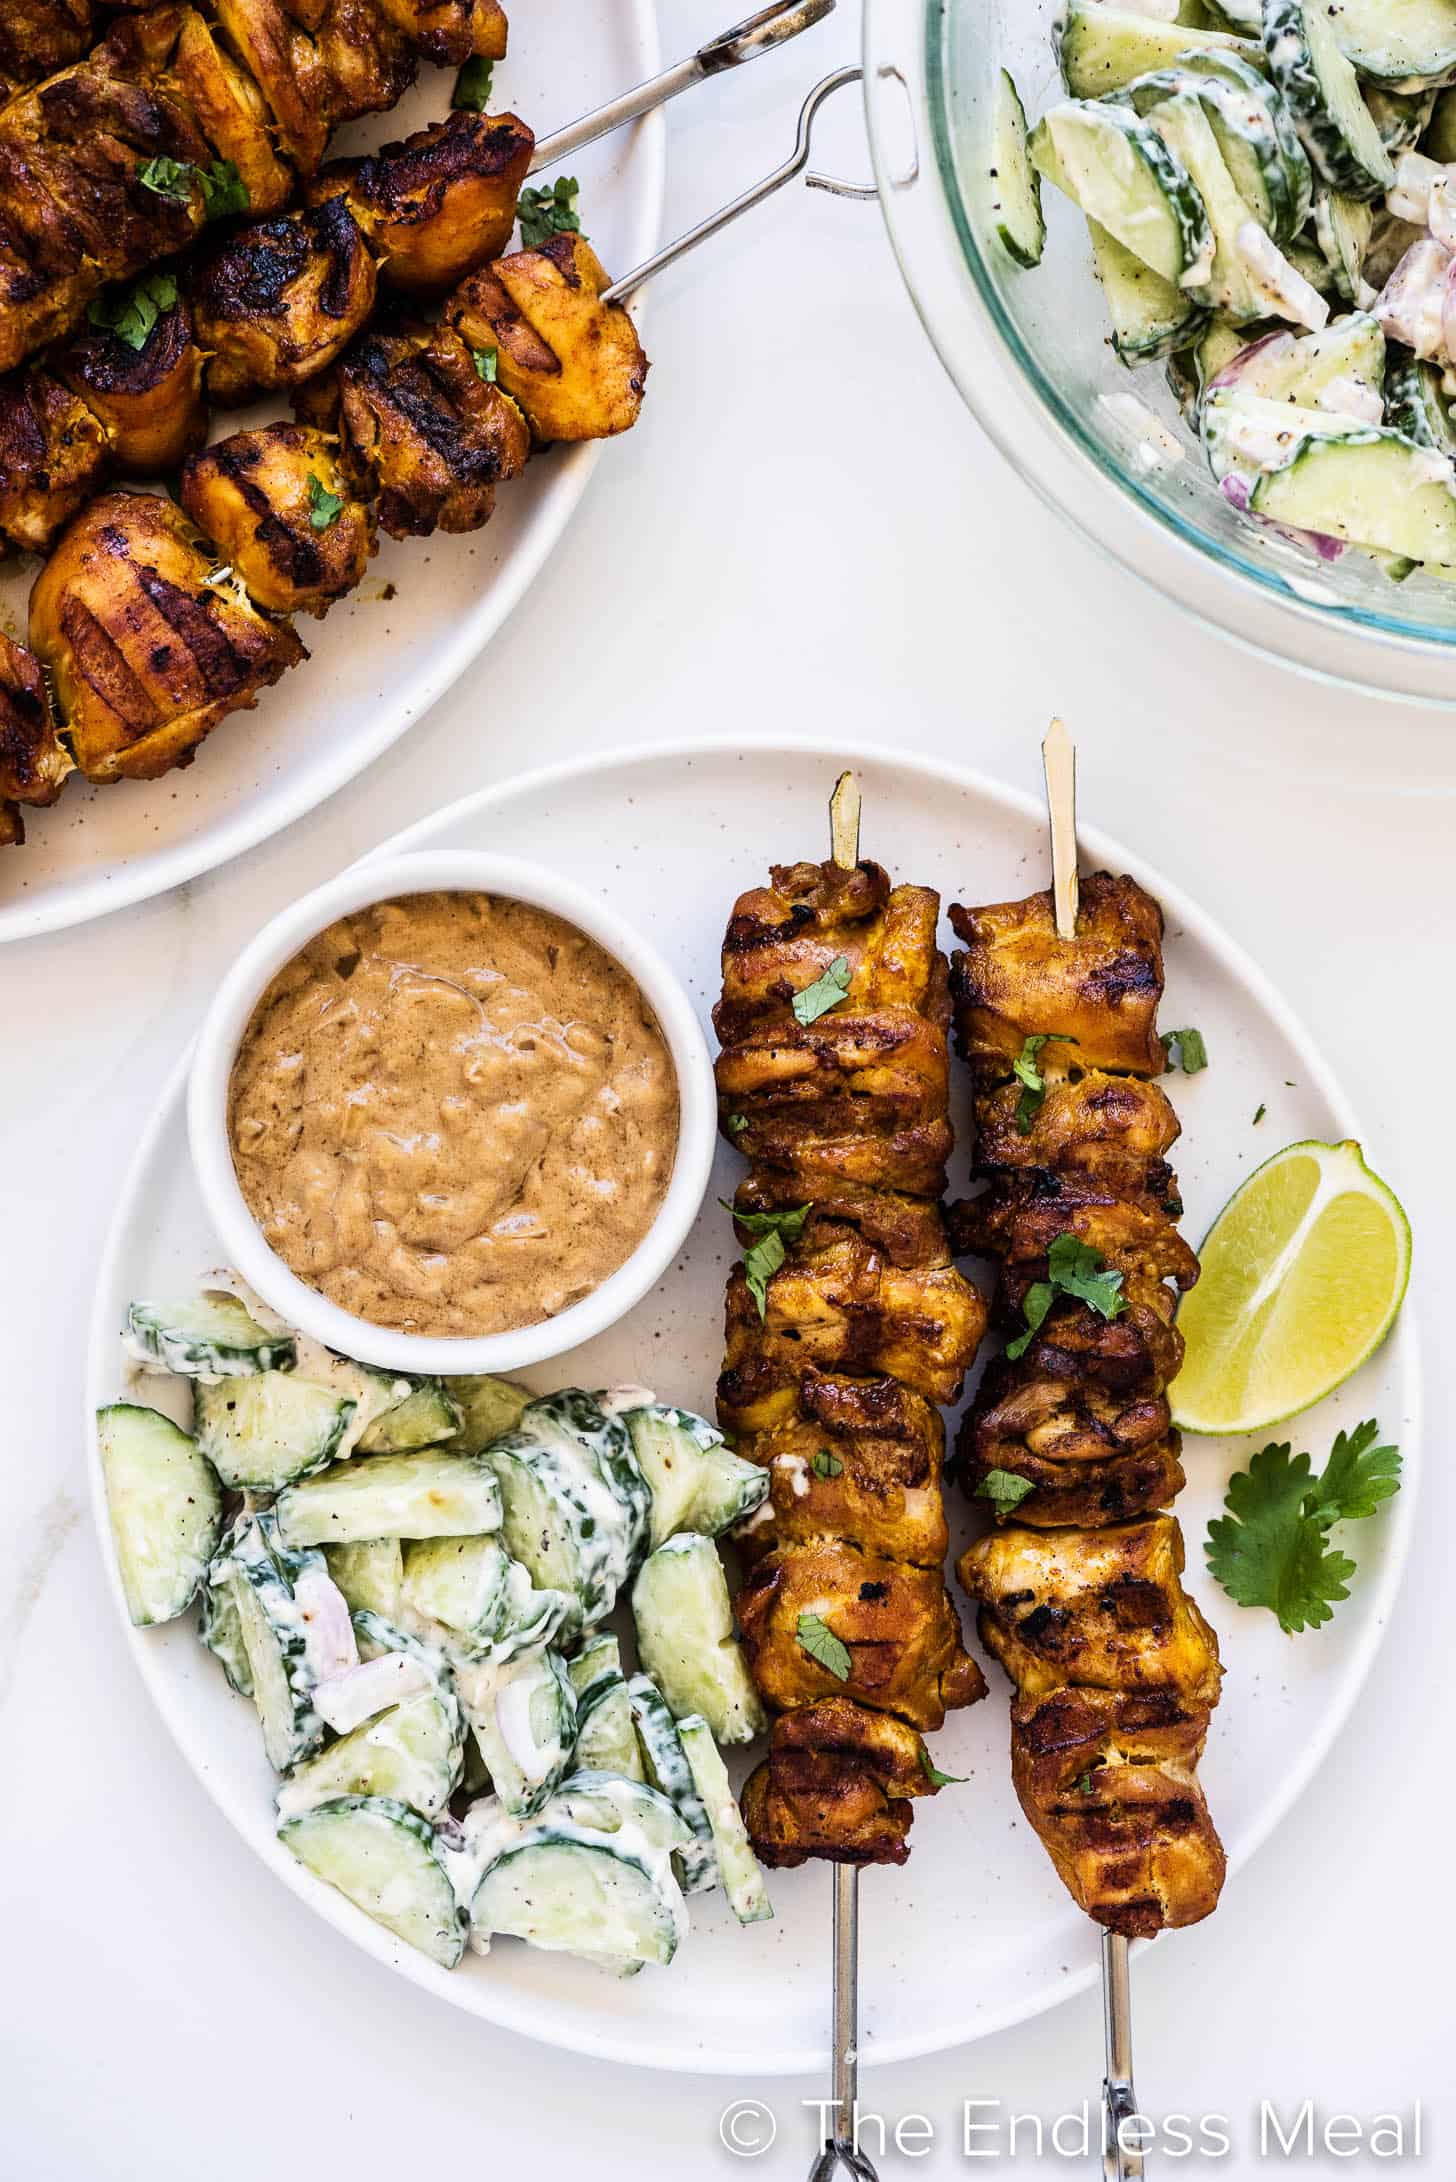 Thai Chicken Skewers with peanut satay sauce and cucumber salad